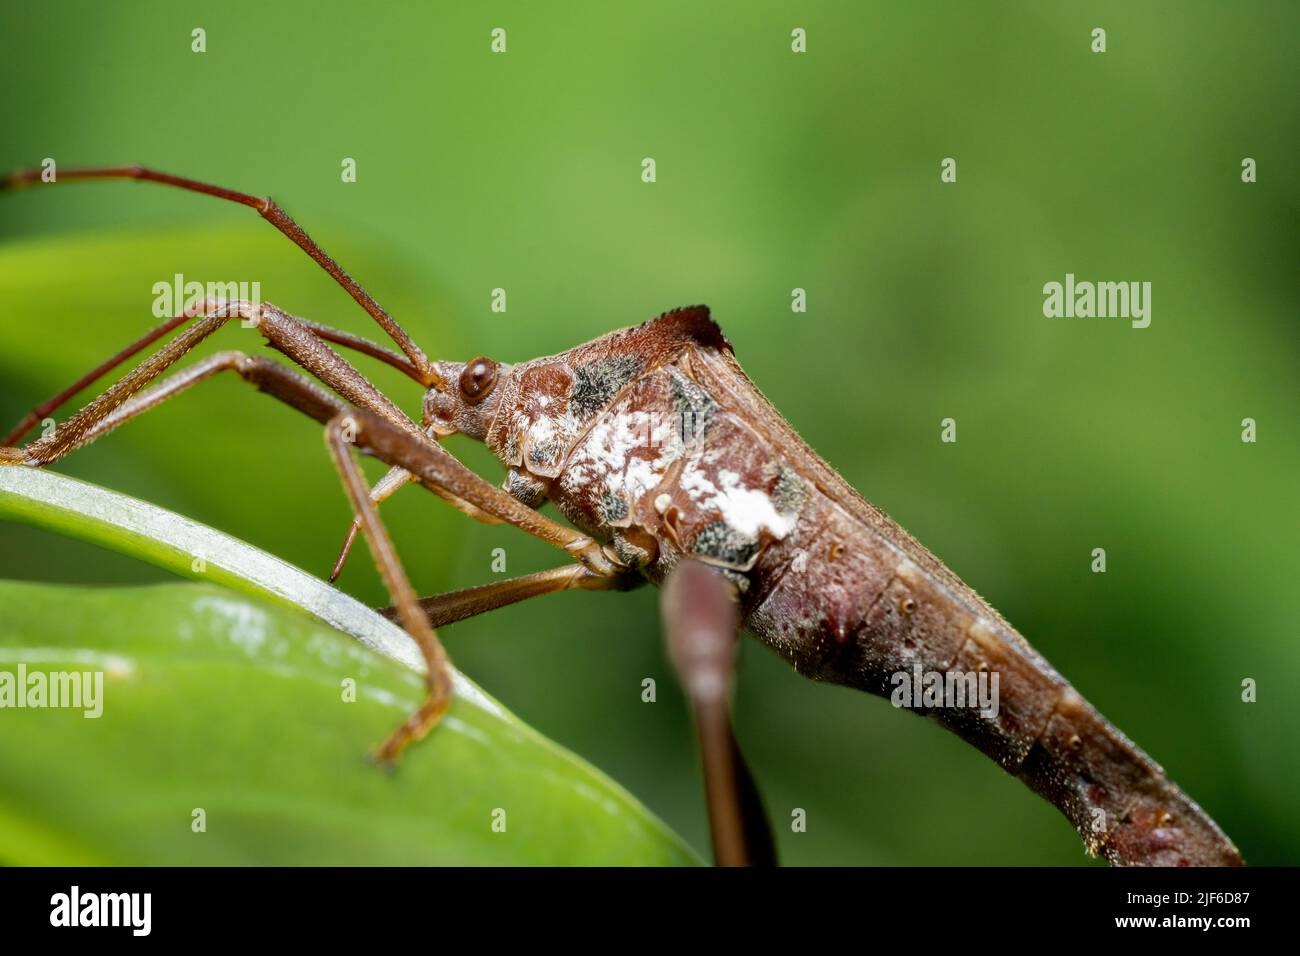 Leaf Footed Bugs animal macro photo in the wild Stock Photo